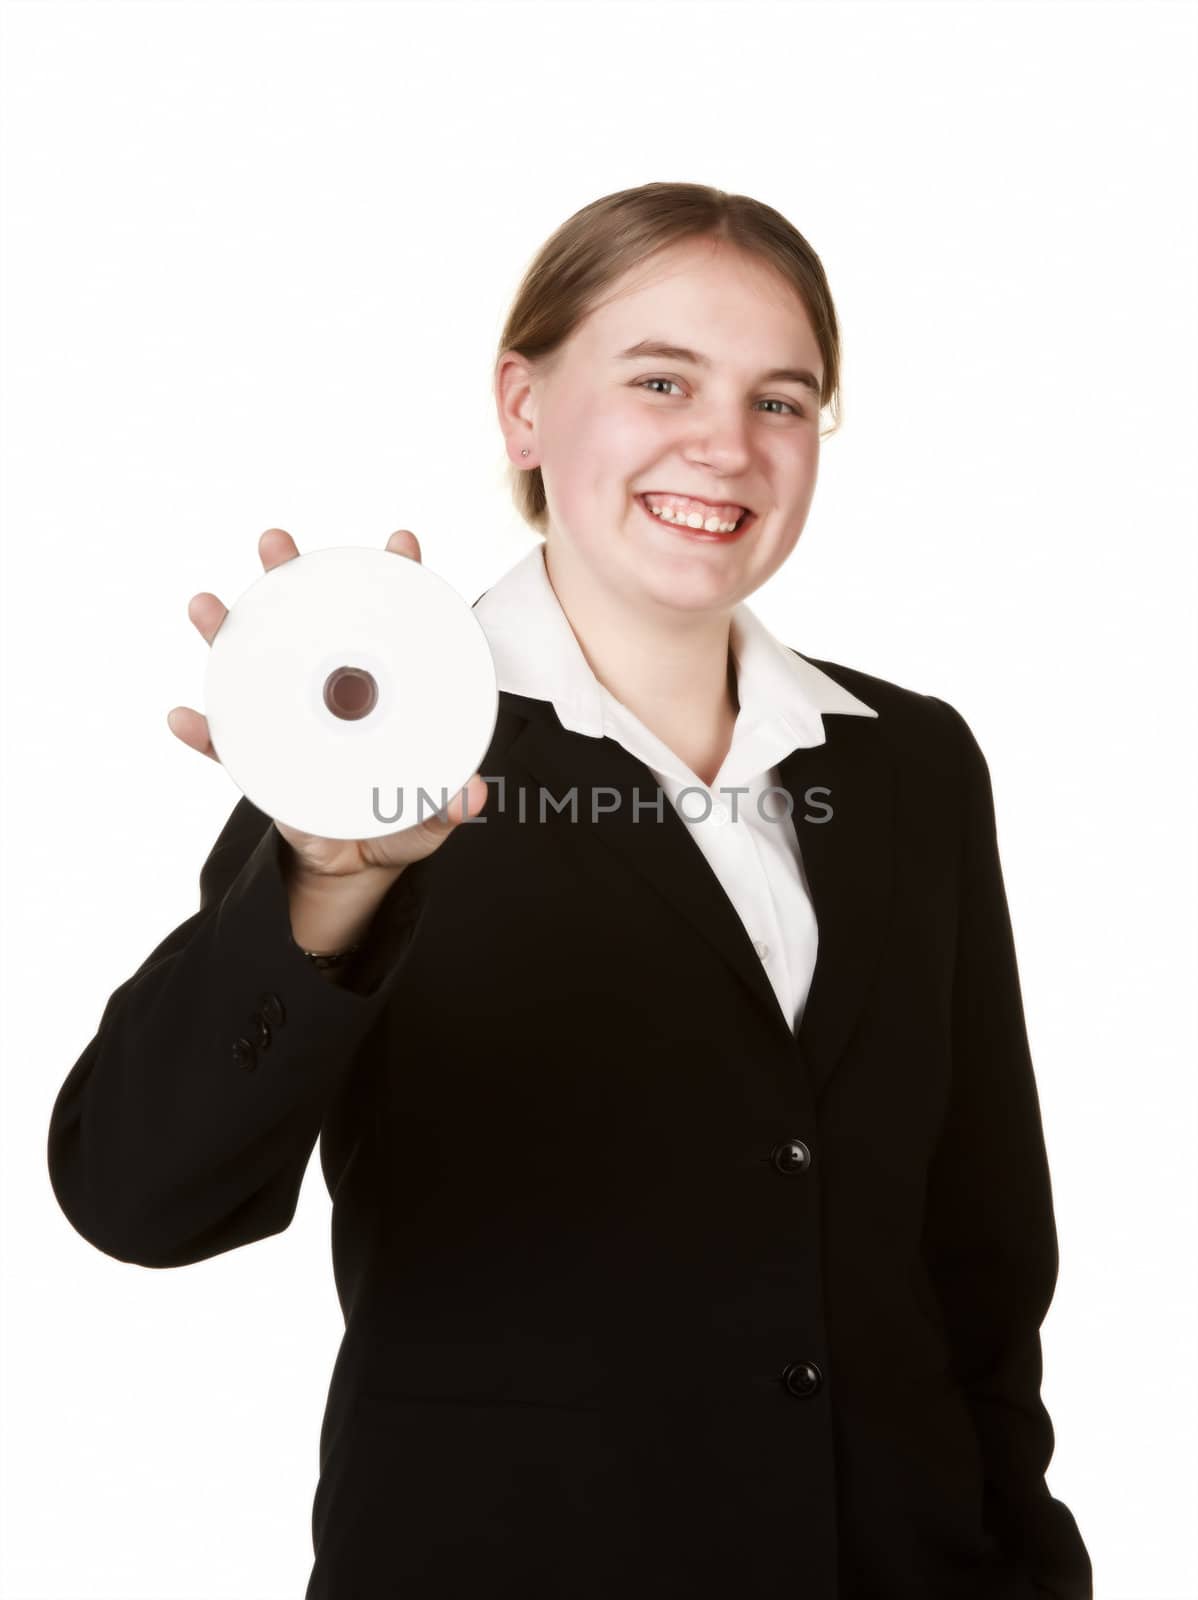 high key image of a young business woman holding cd or dvd